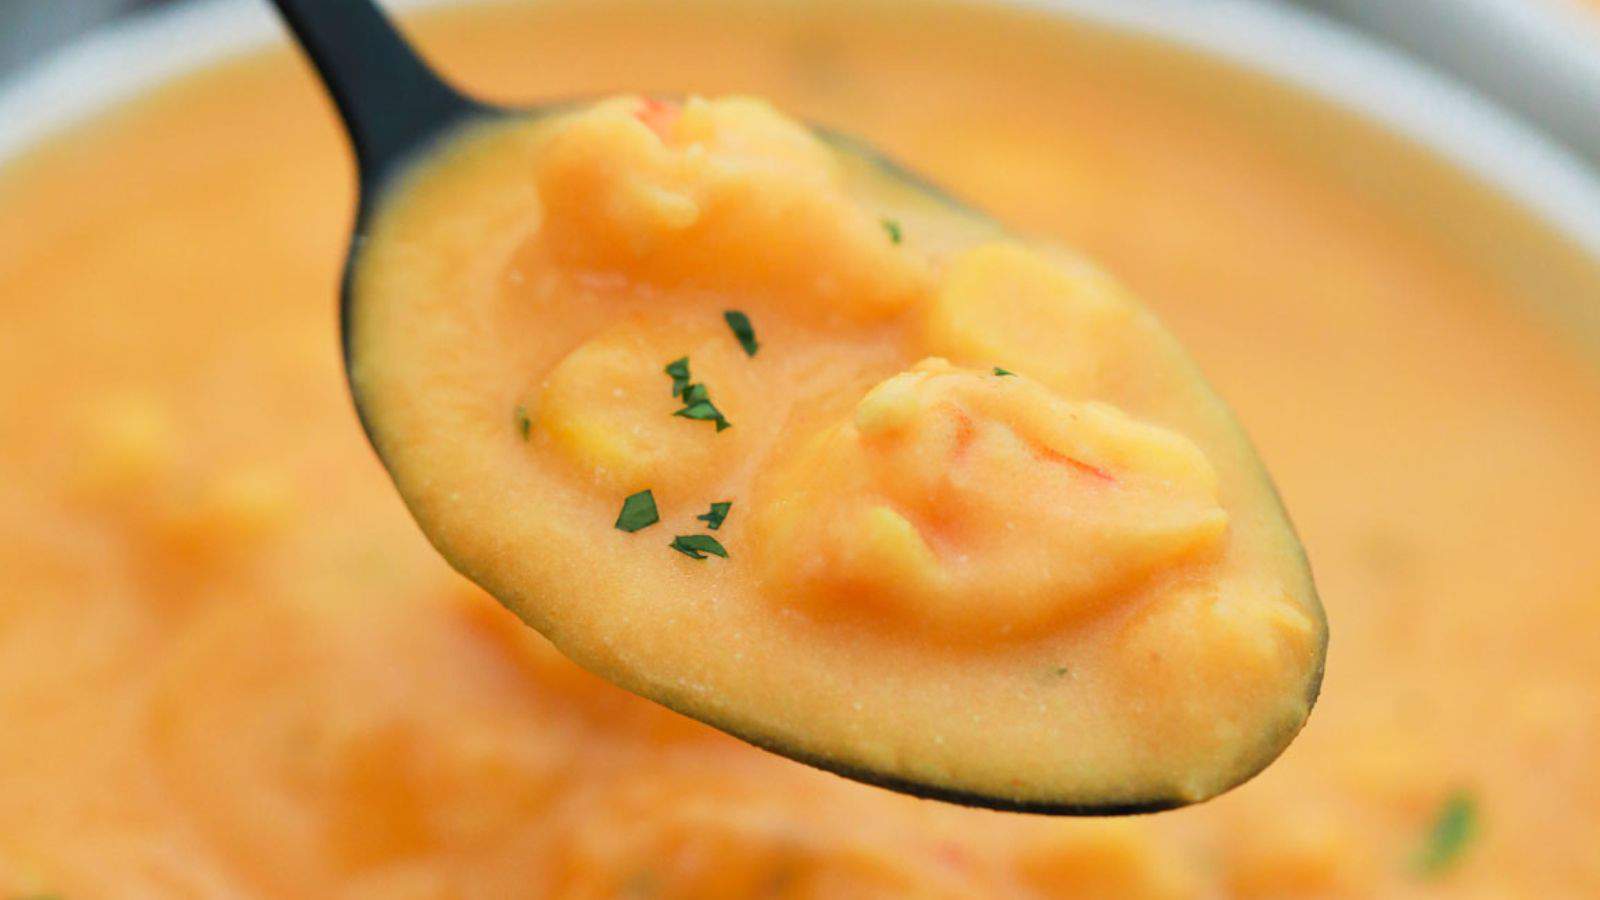 A close-up image of a spoonful of creamy shrimp bisque garnished with herbs, hovering above the rest of the soup in a bowl.